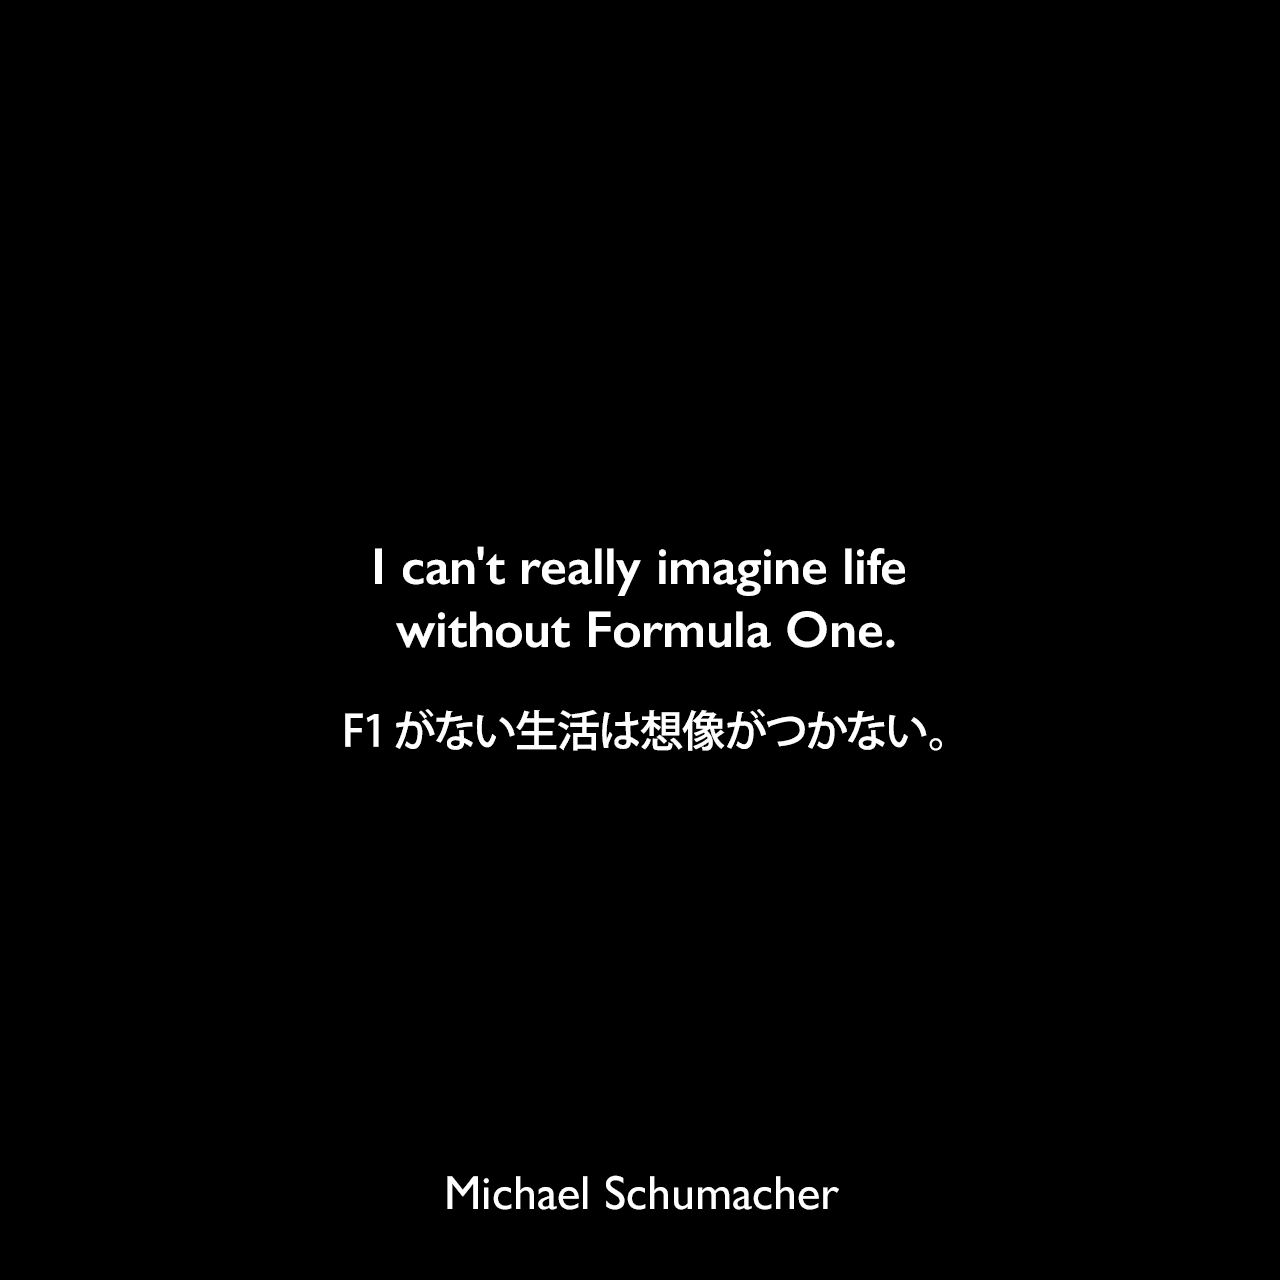 I can't really imagine life without Formula One.F1がない生活は想像がつかない。Michael Schumacher